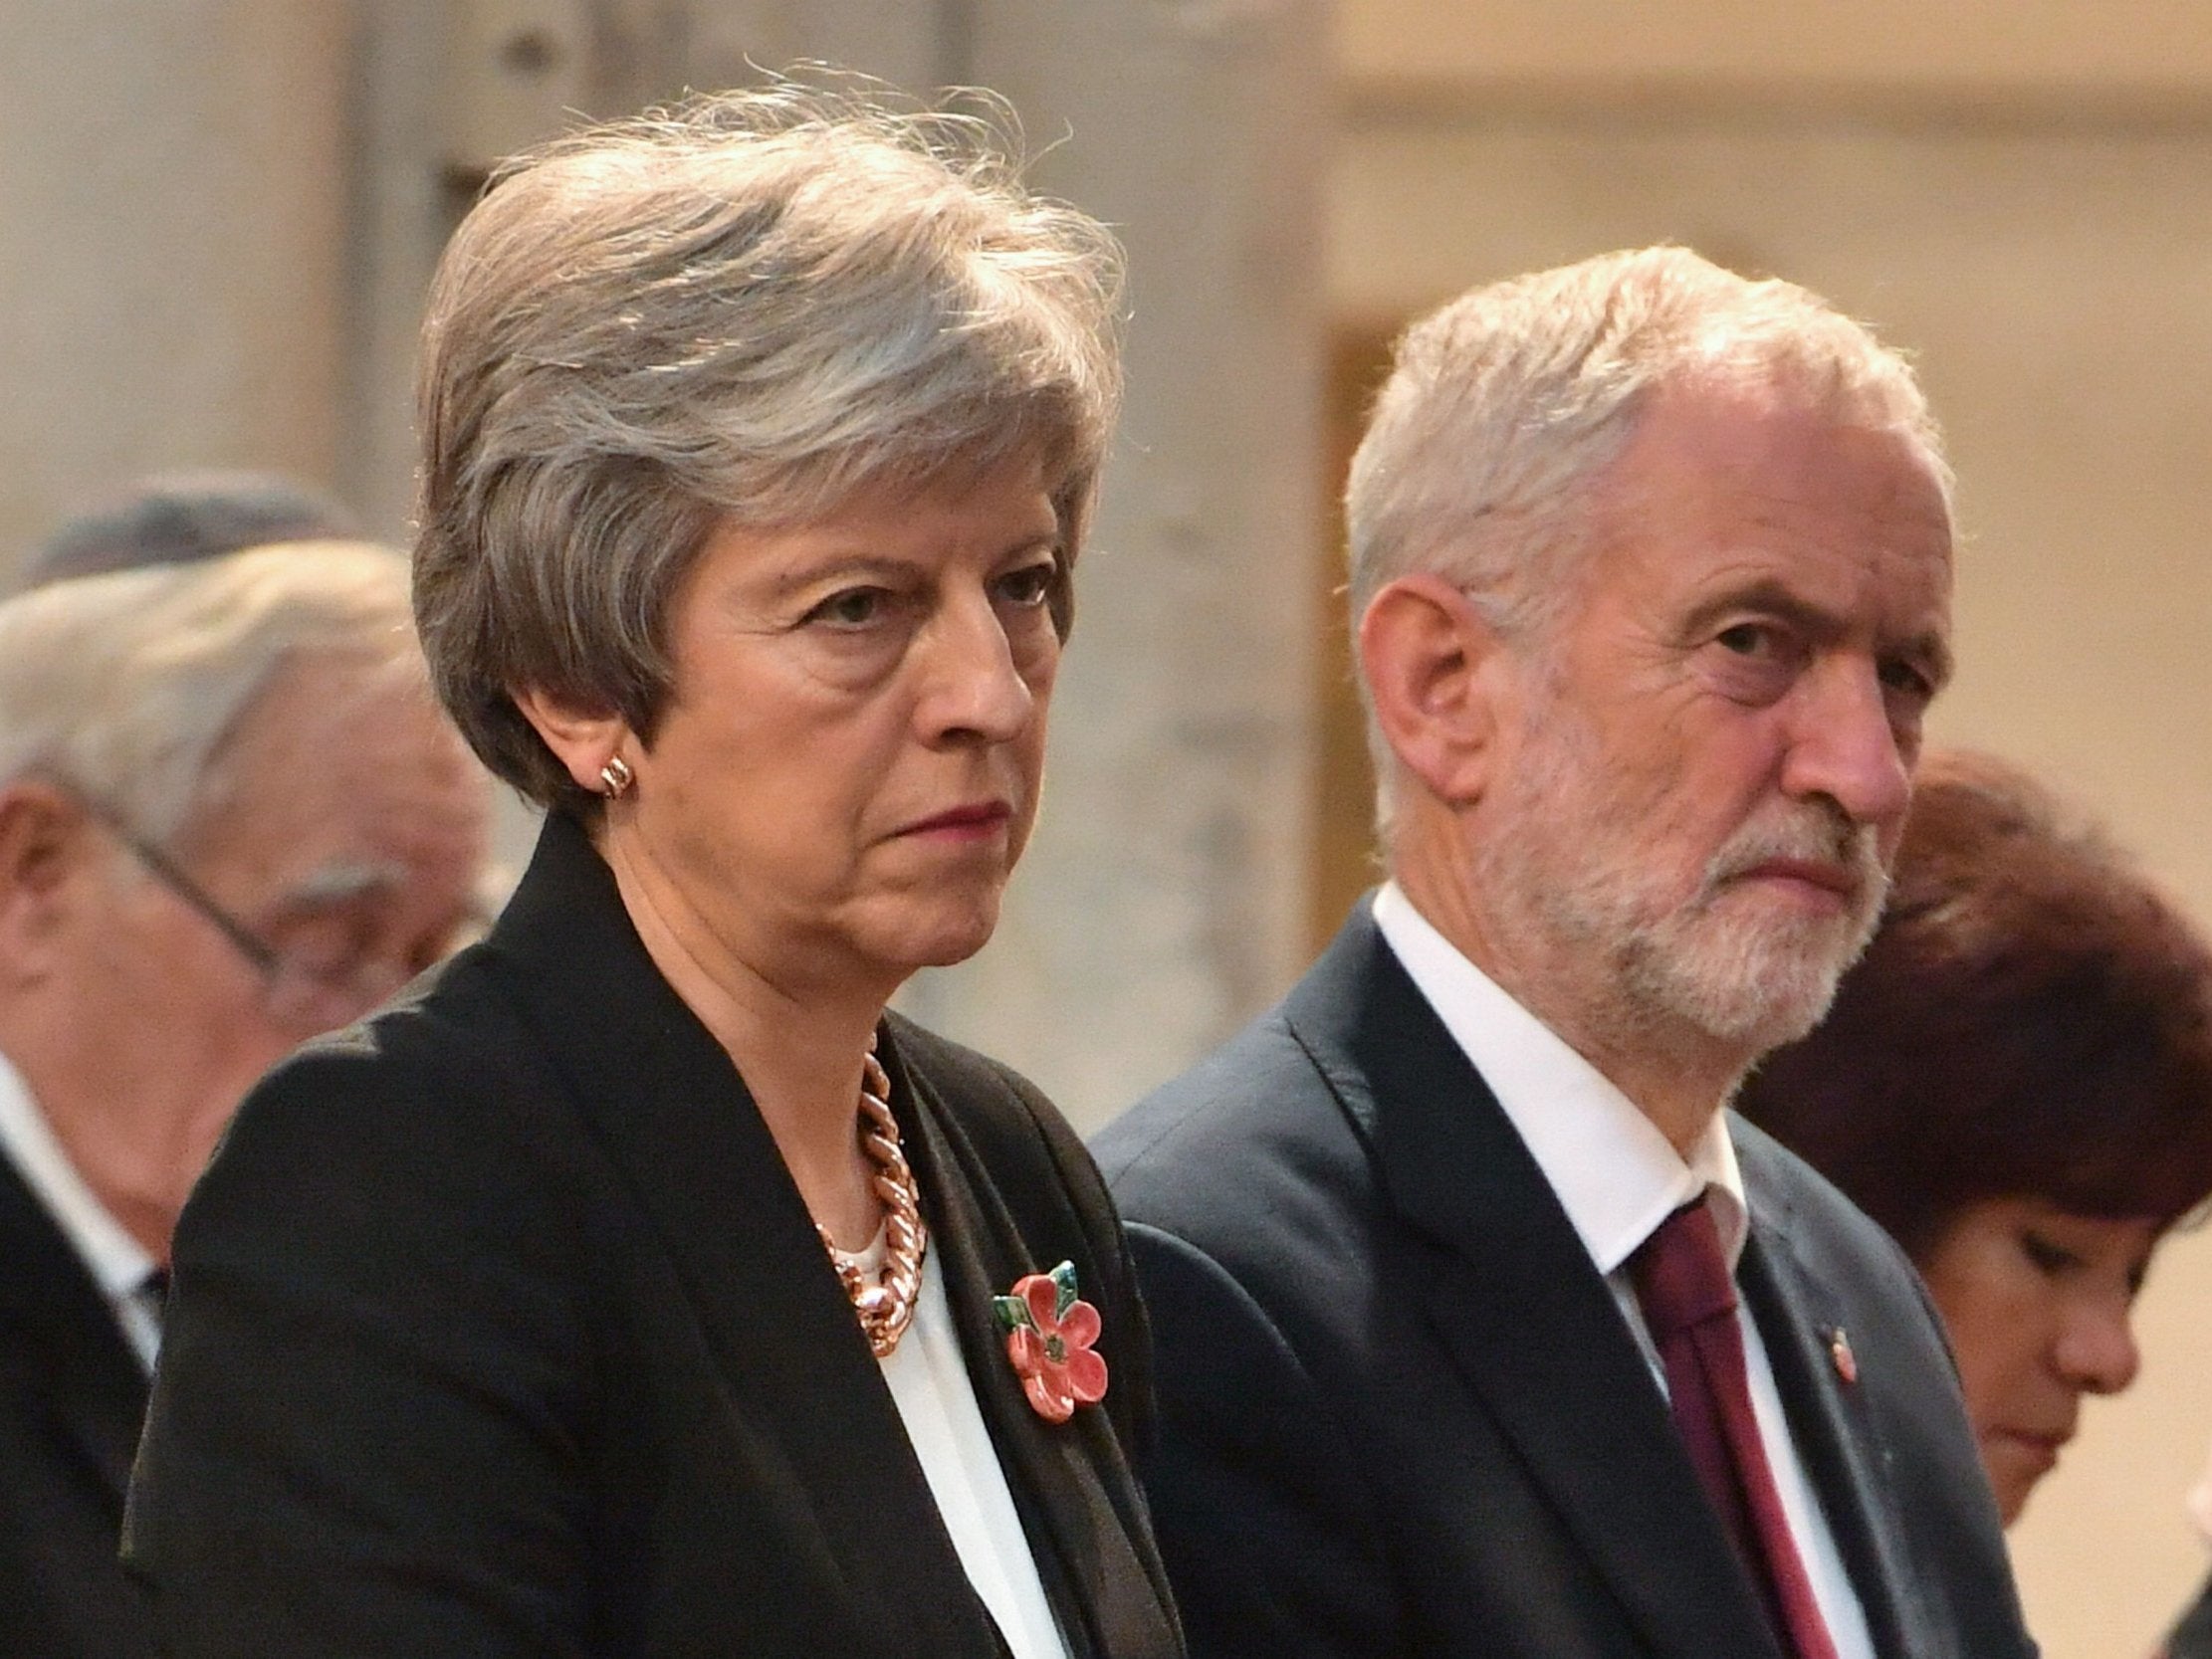 At least a Final Say would light a fire under those sections of the party that have become deeply disillusioned with the way Labour has played the role of midwife to May’s hard Brexit